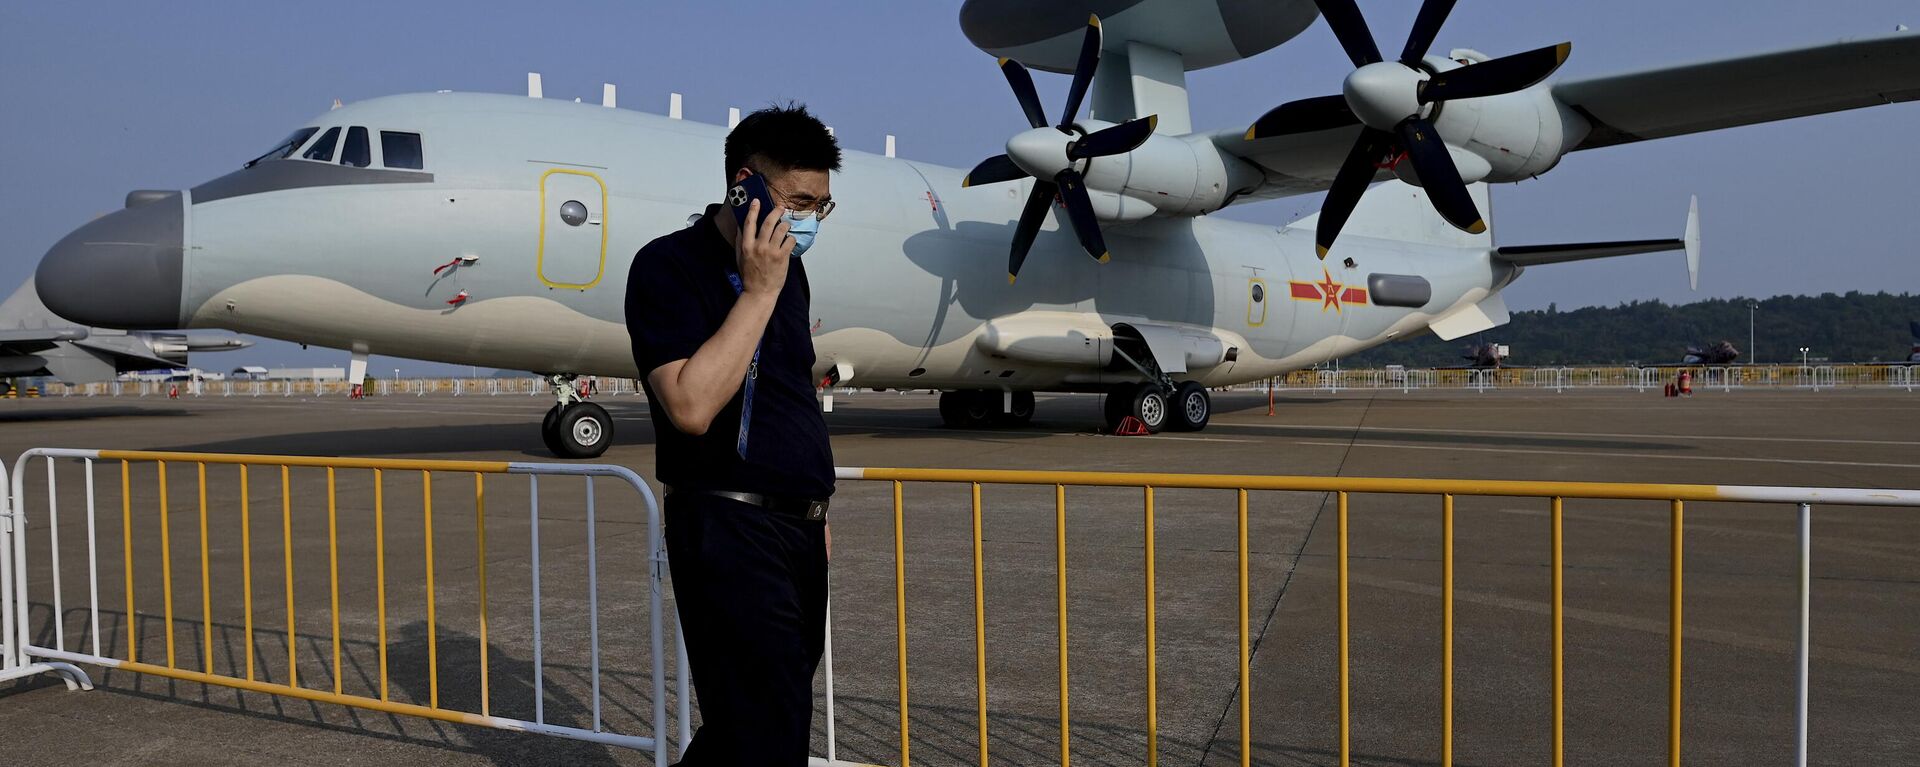 A man walks in front of a Shaanxi Aircraft Corporation's KJ-500 airborne early warning and control aircraft at the 13th China International Aviation and Aerospace Exhibition in Zhuhai in southern China's Guangdong province on September 28, 2021. - Sputnik International, 1920, 11.11.2022